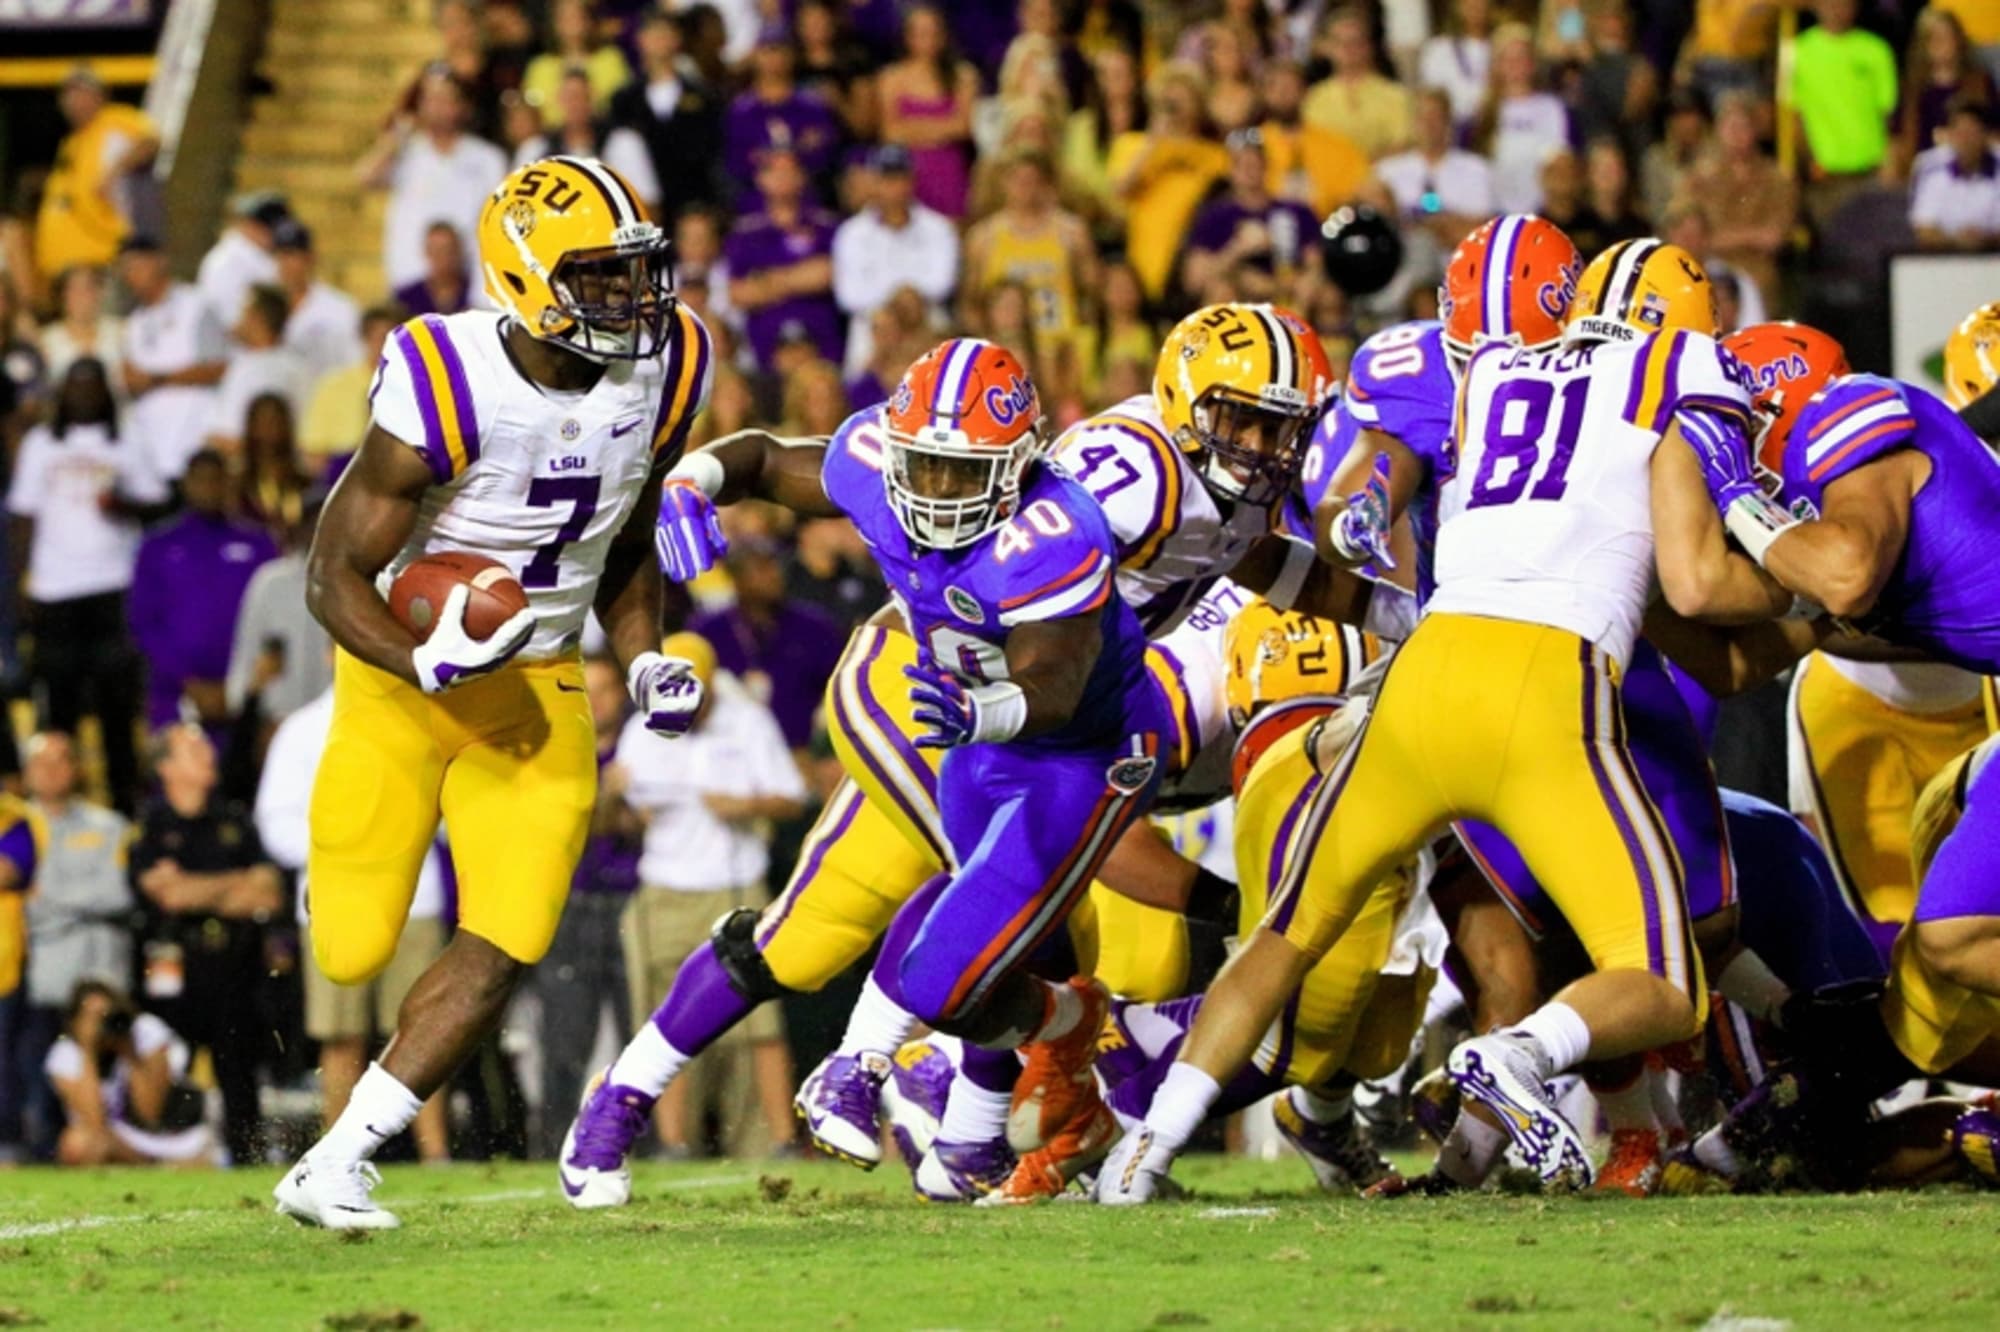 Florida vs. LSU Full highlights, final score and more